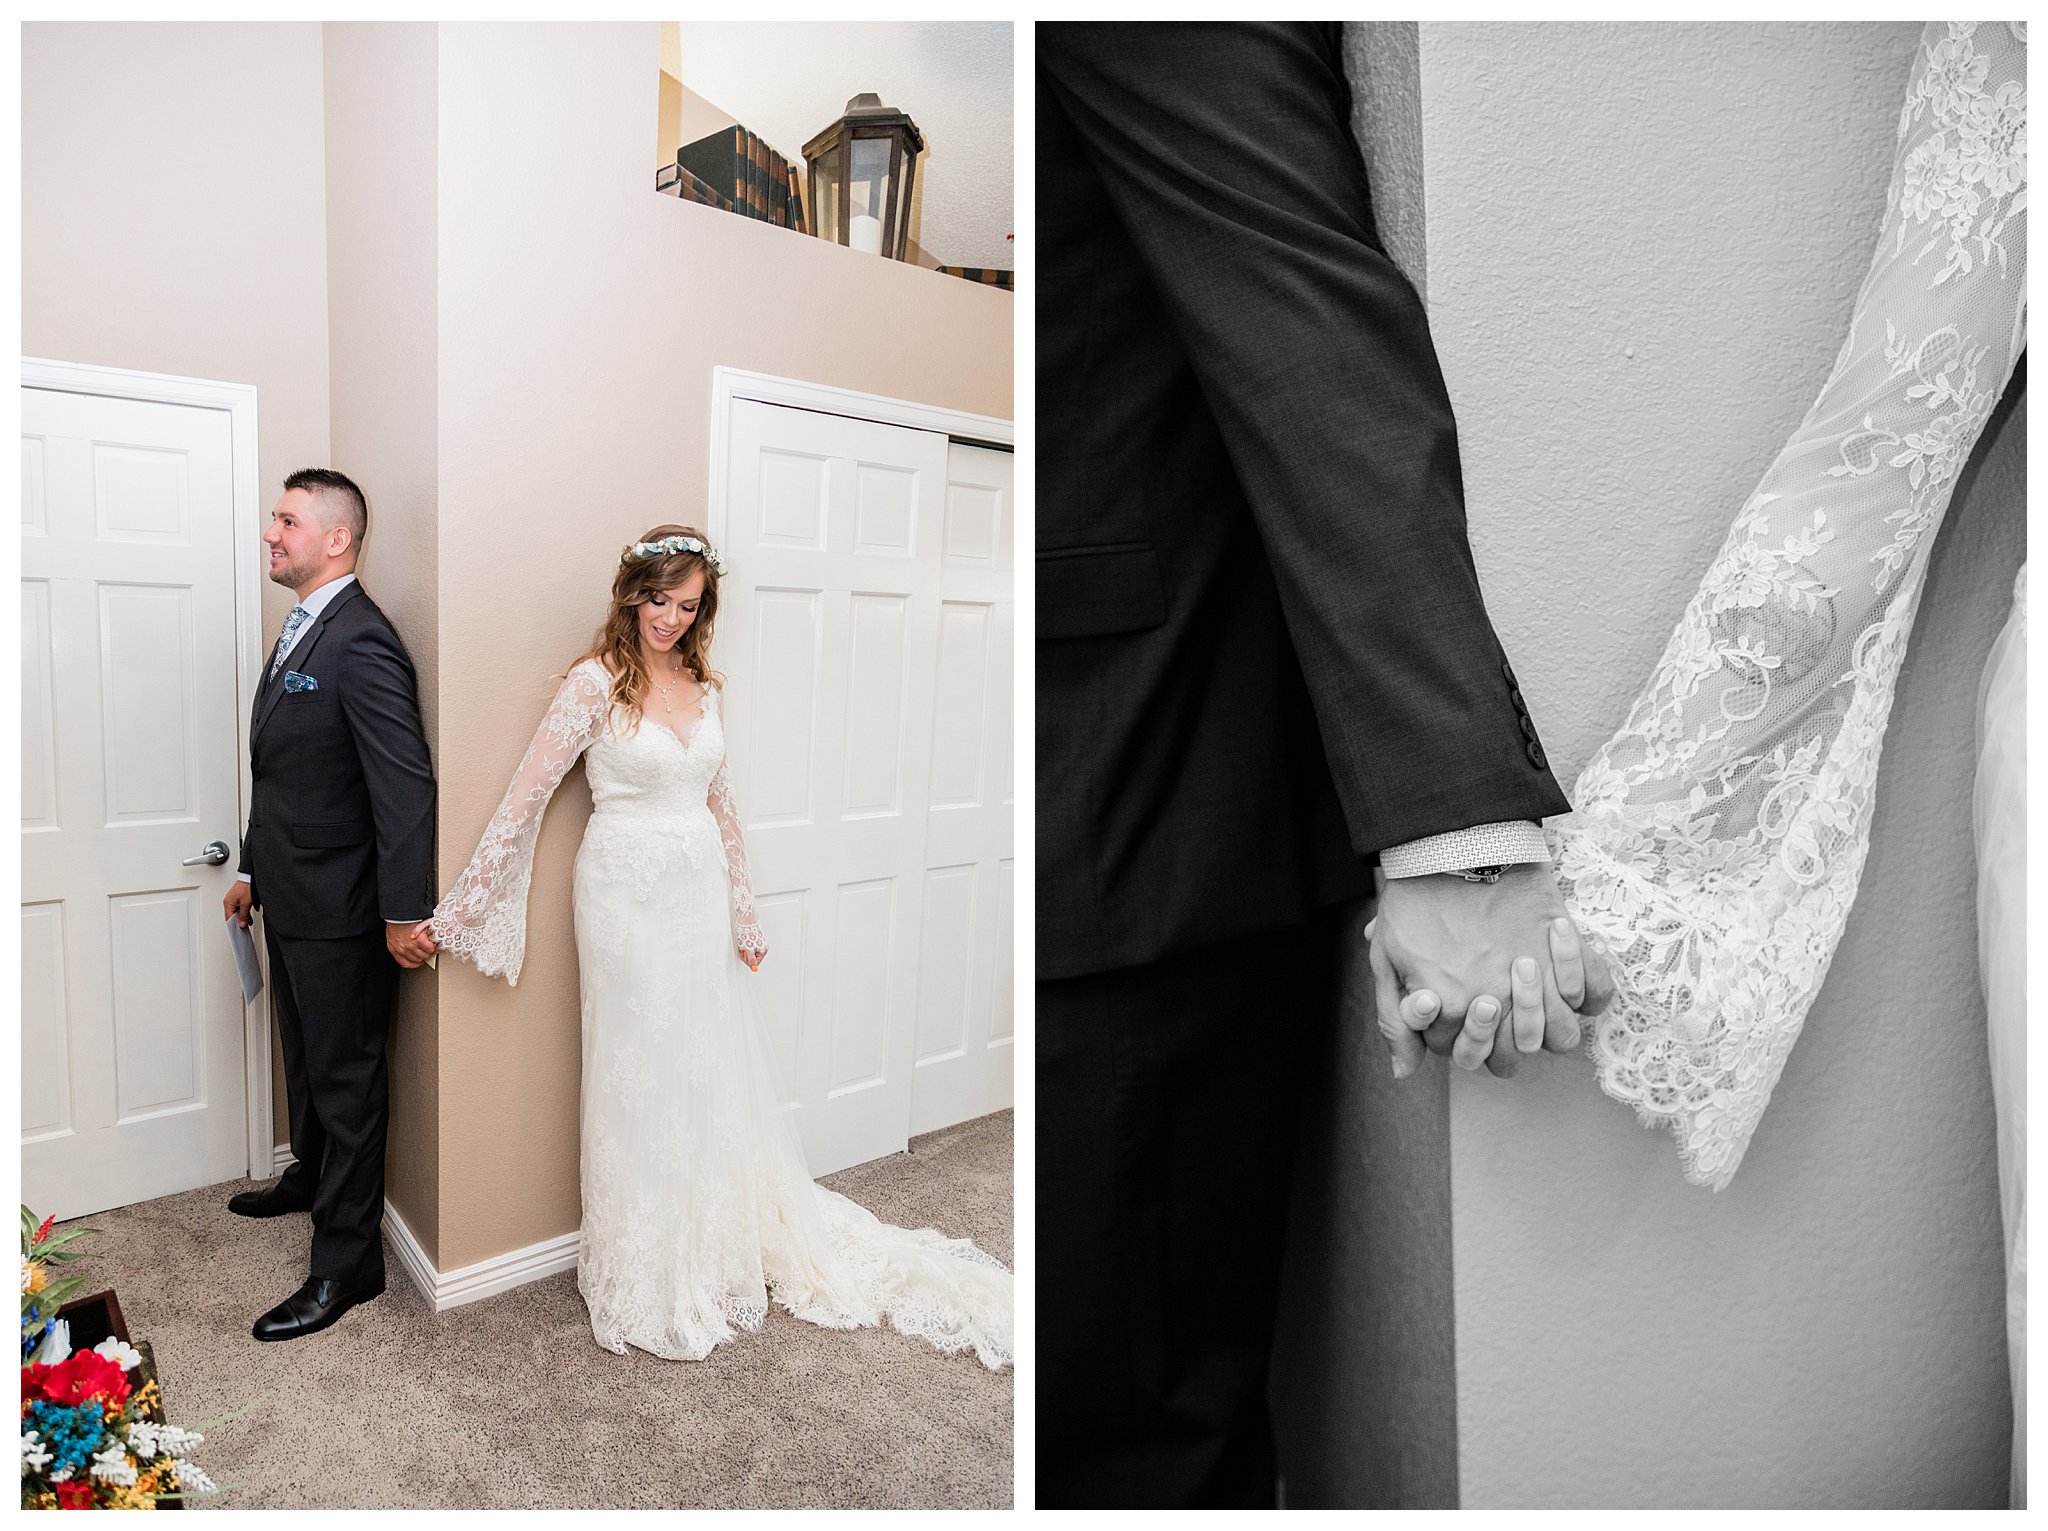 A bride and groom hold hands during a first touch before their ceremony